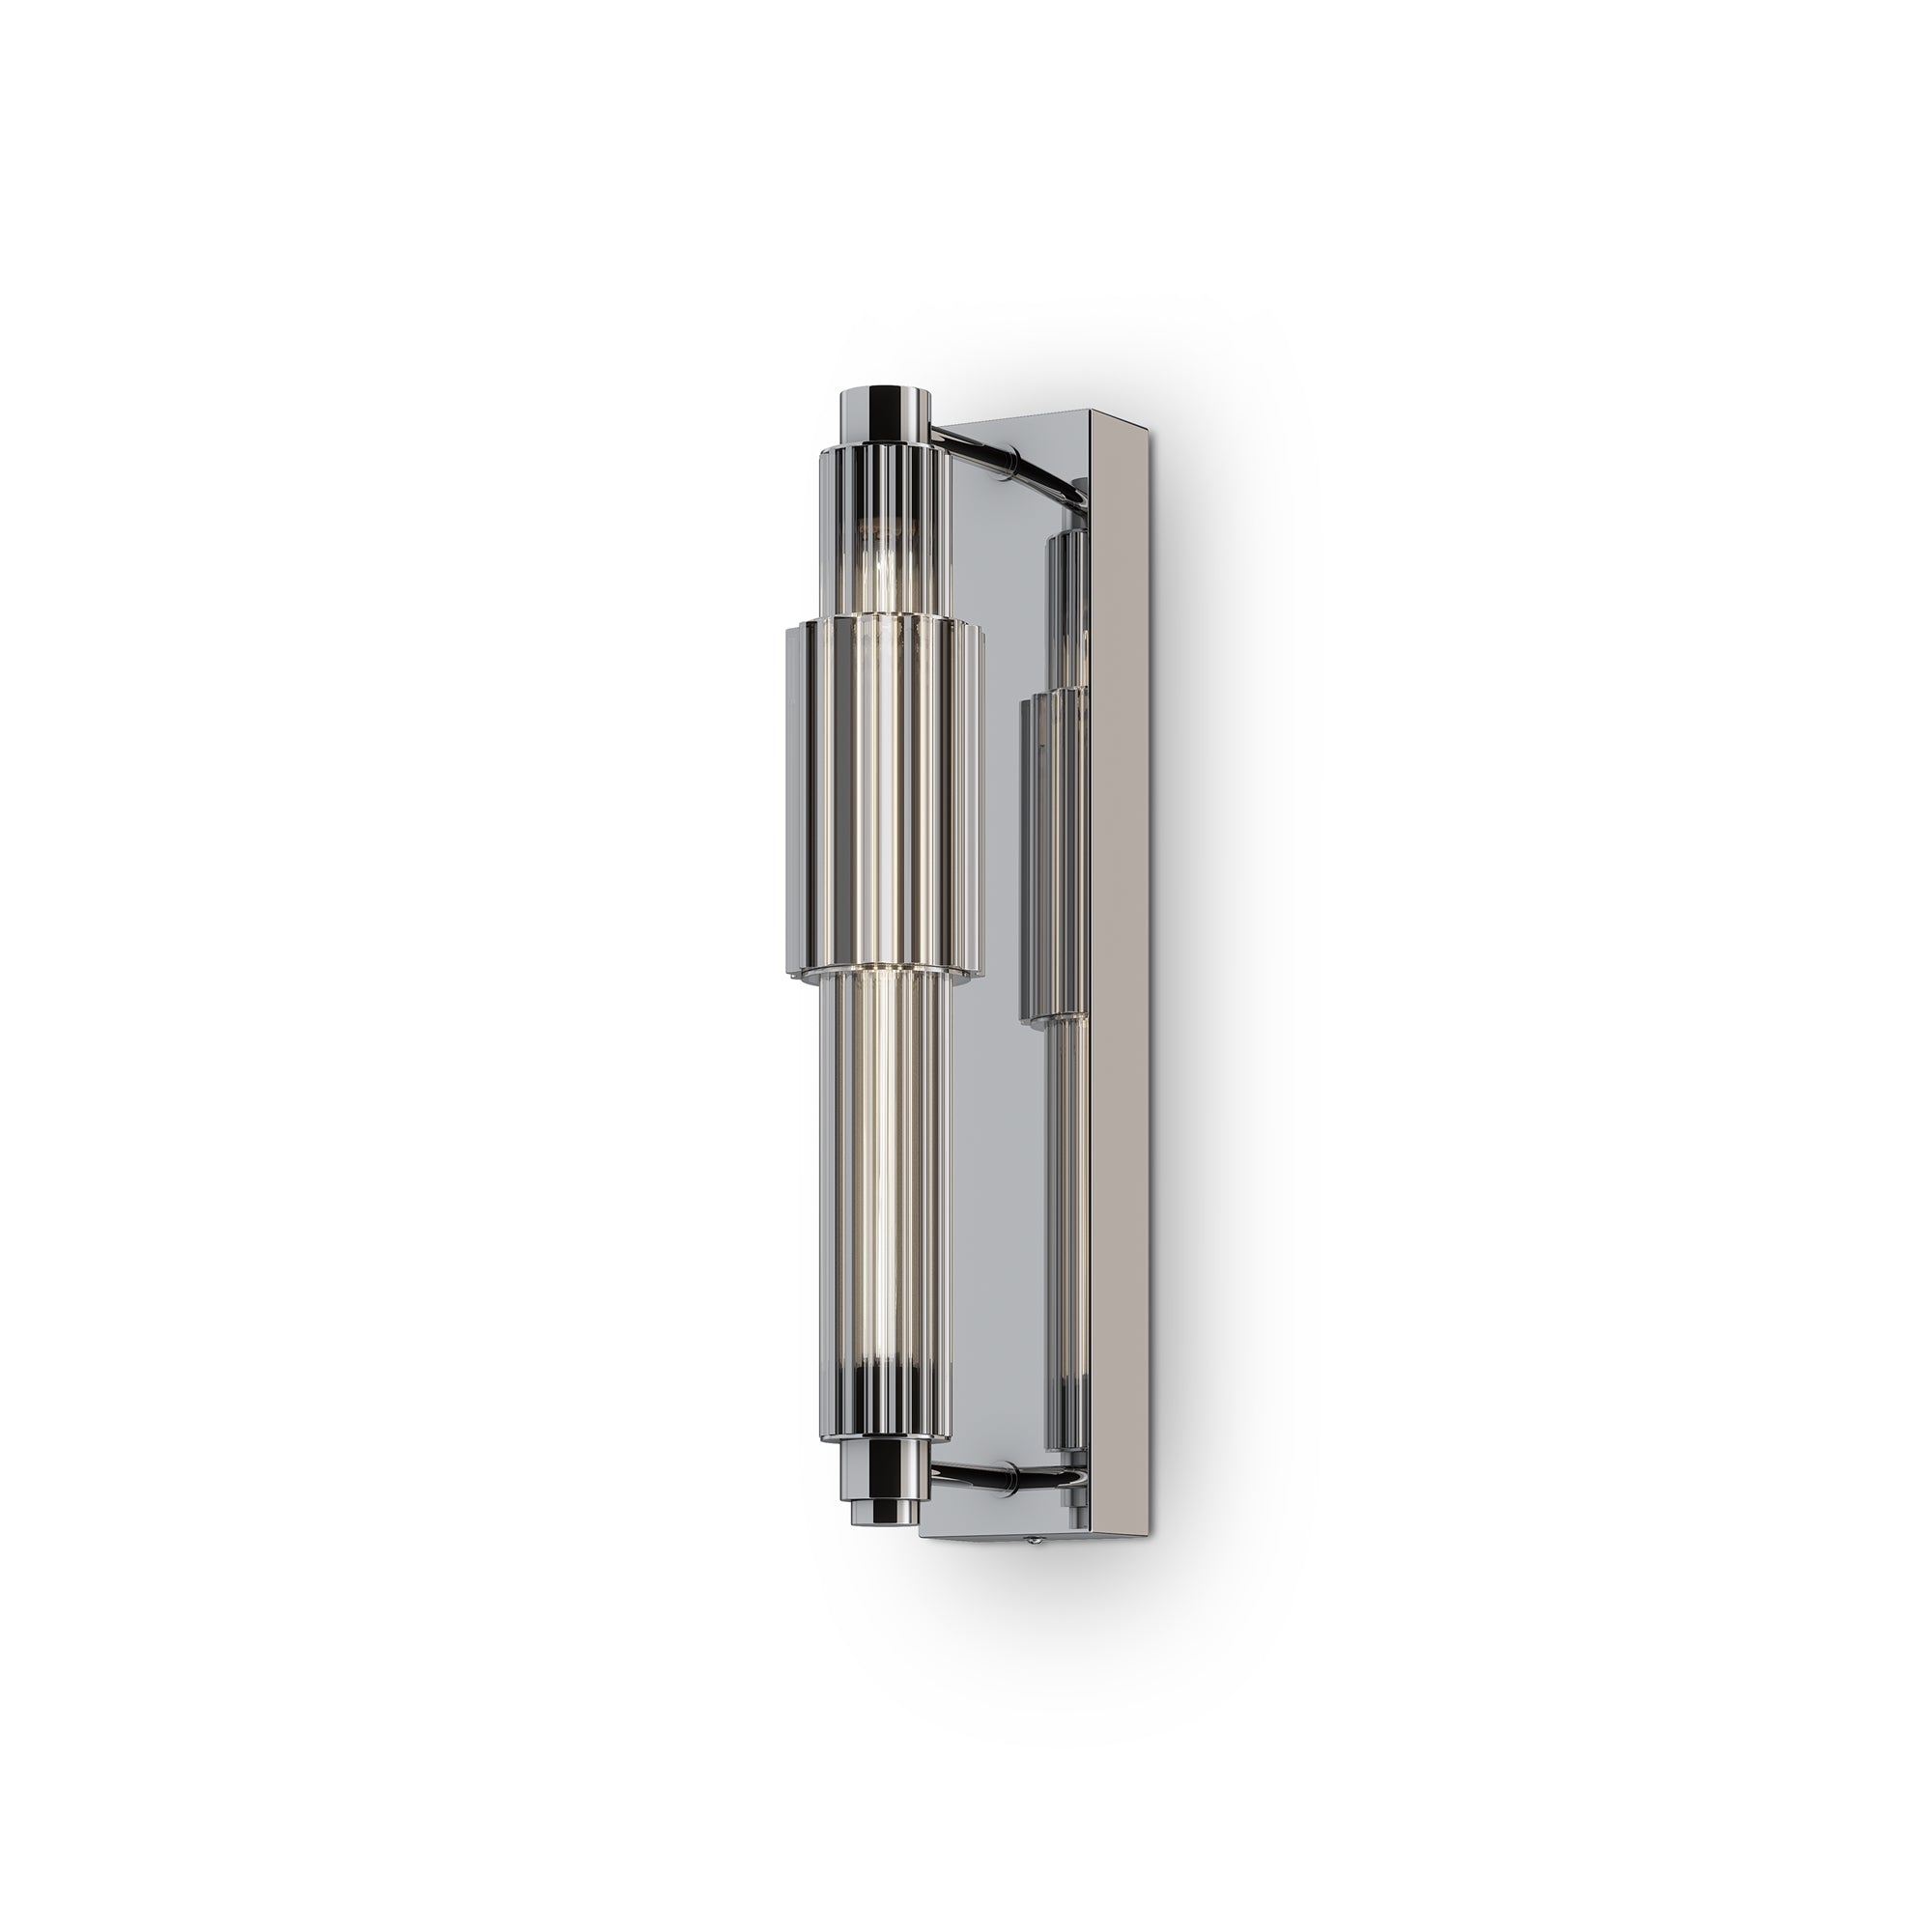 Verticale Indoor LED Wall Light - Chrome & Cognac/Chrome Finish